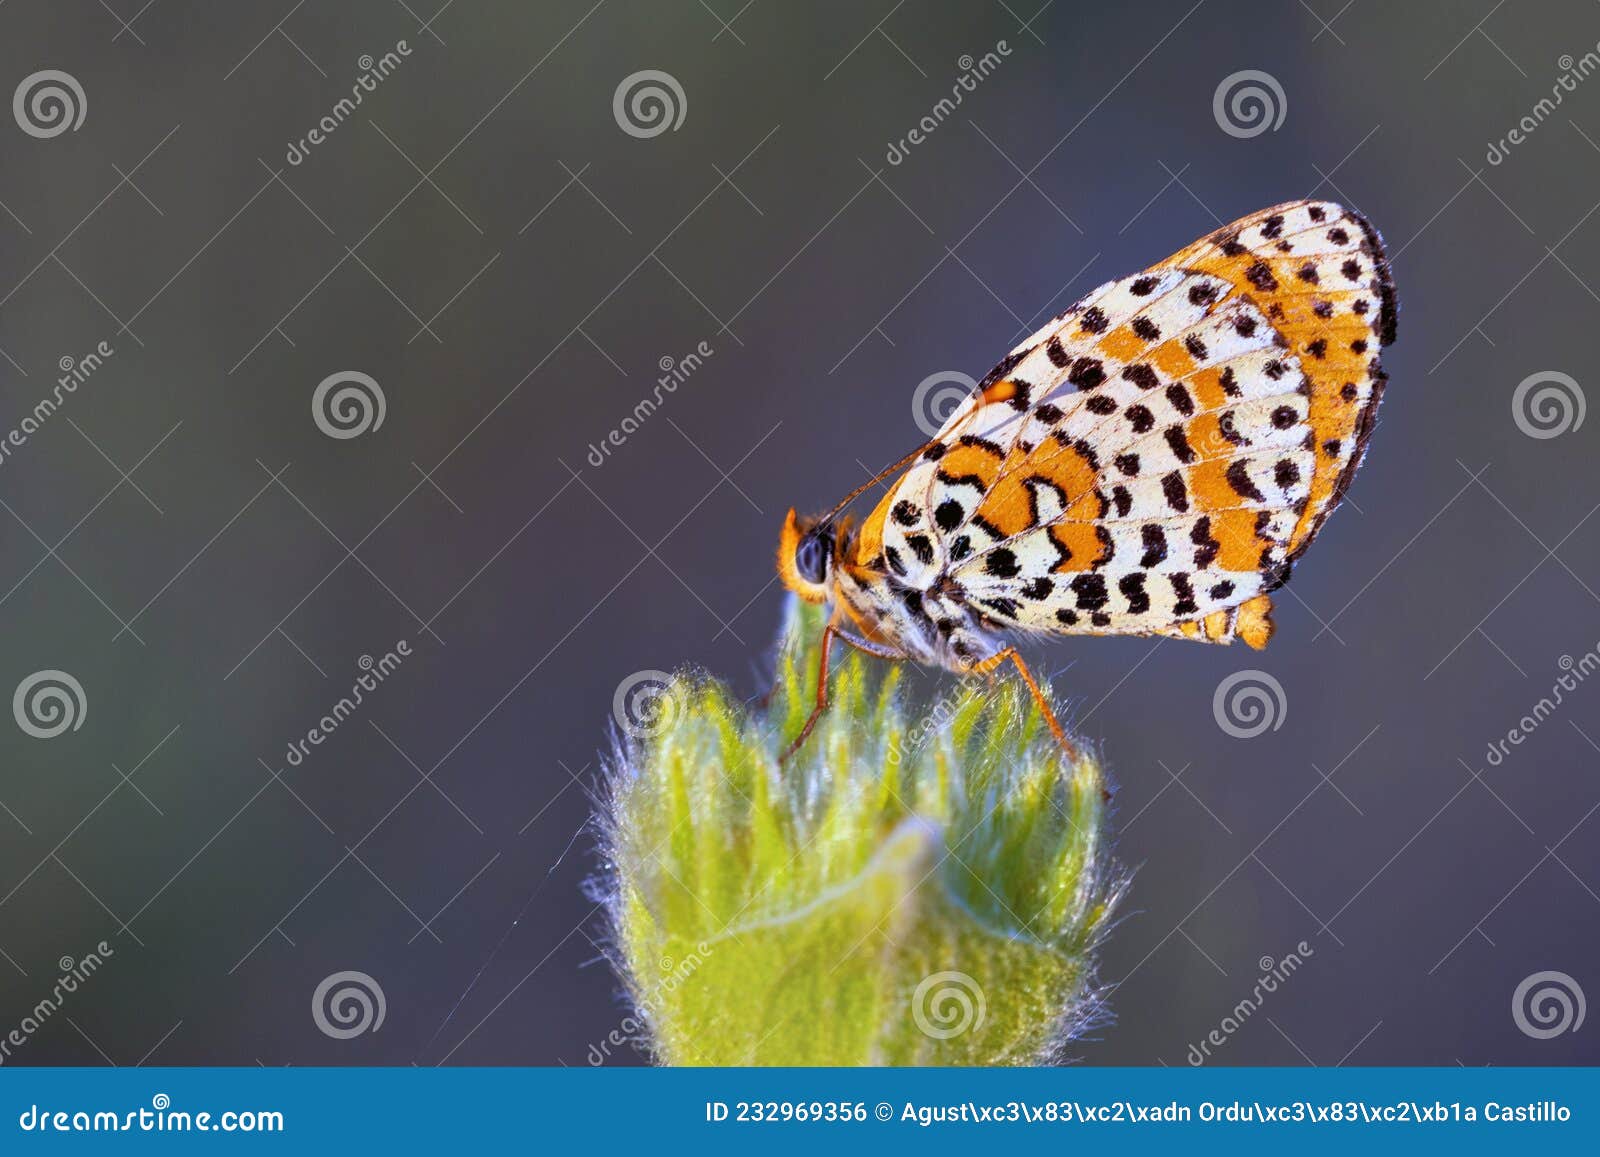 day butterfly perched on flower, melitaea aetherie